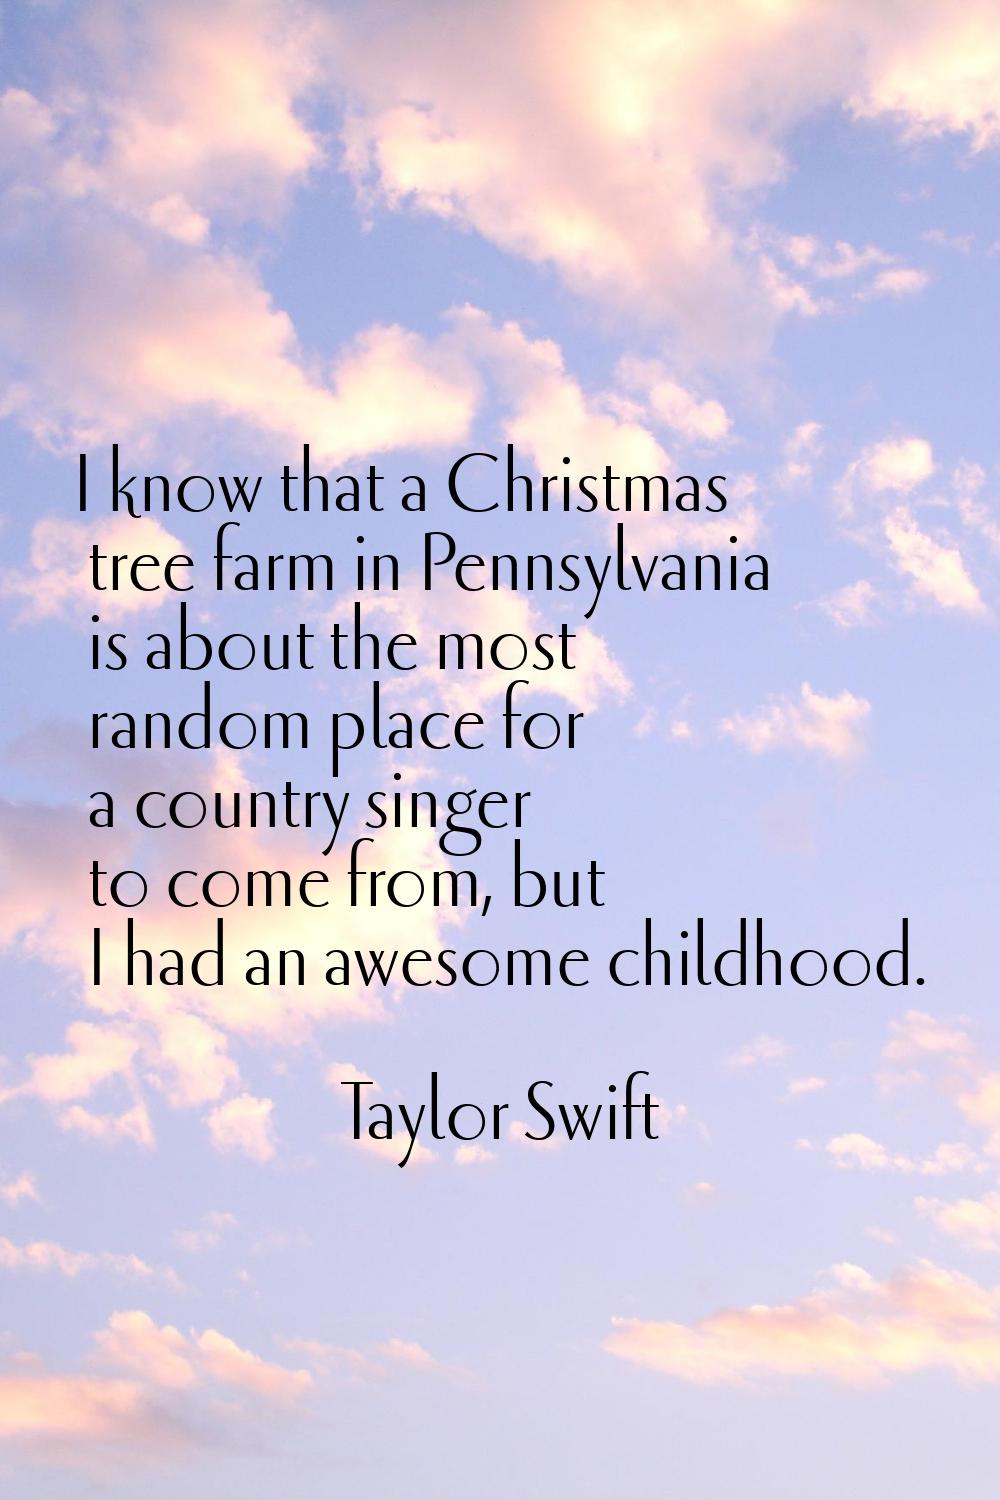 I know that a Christmas tree farm in Pennsylvania is about the most random place for a country sing